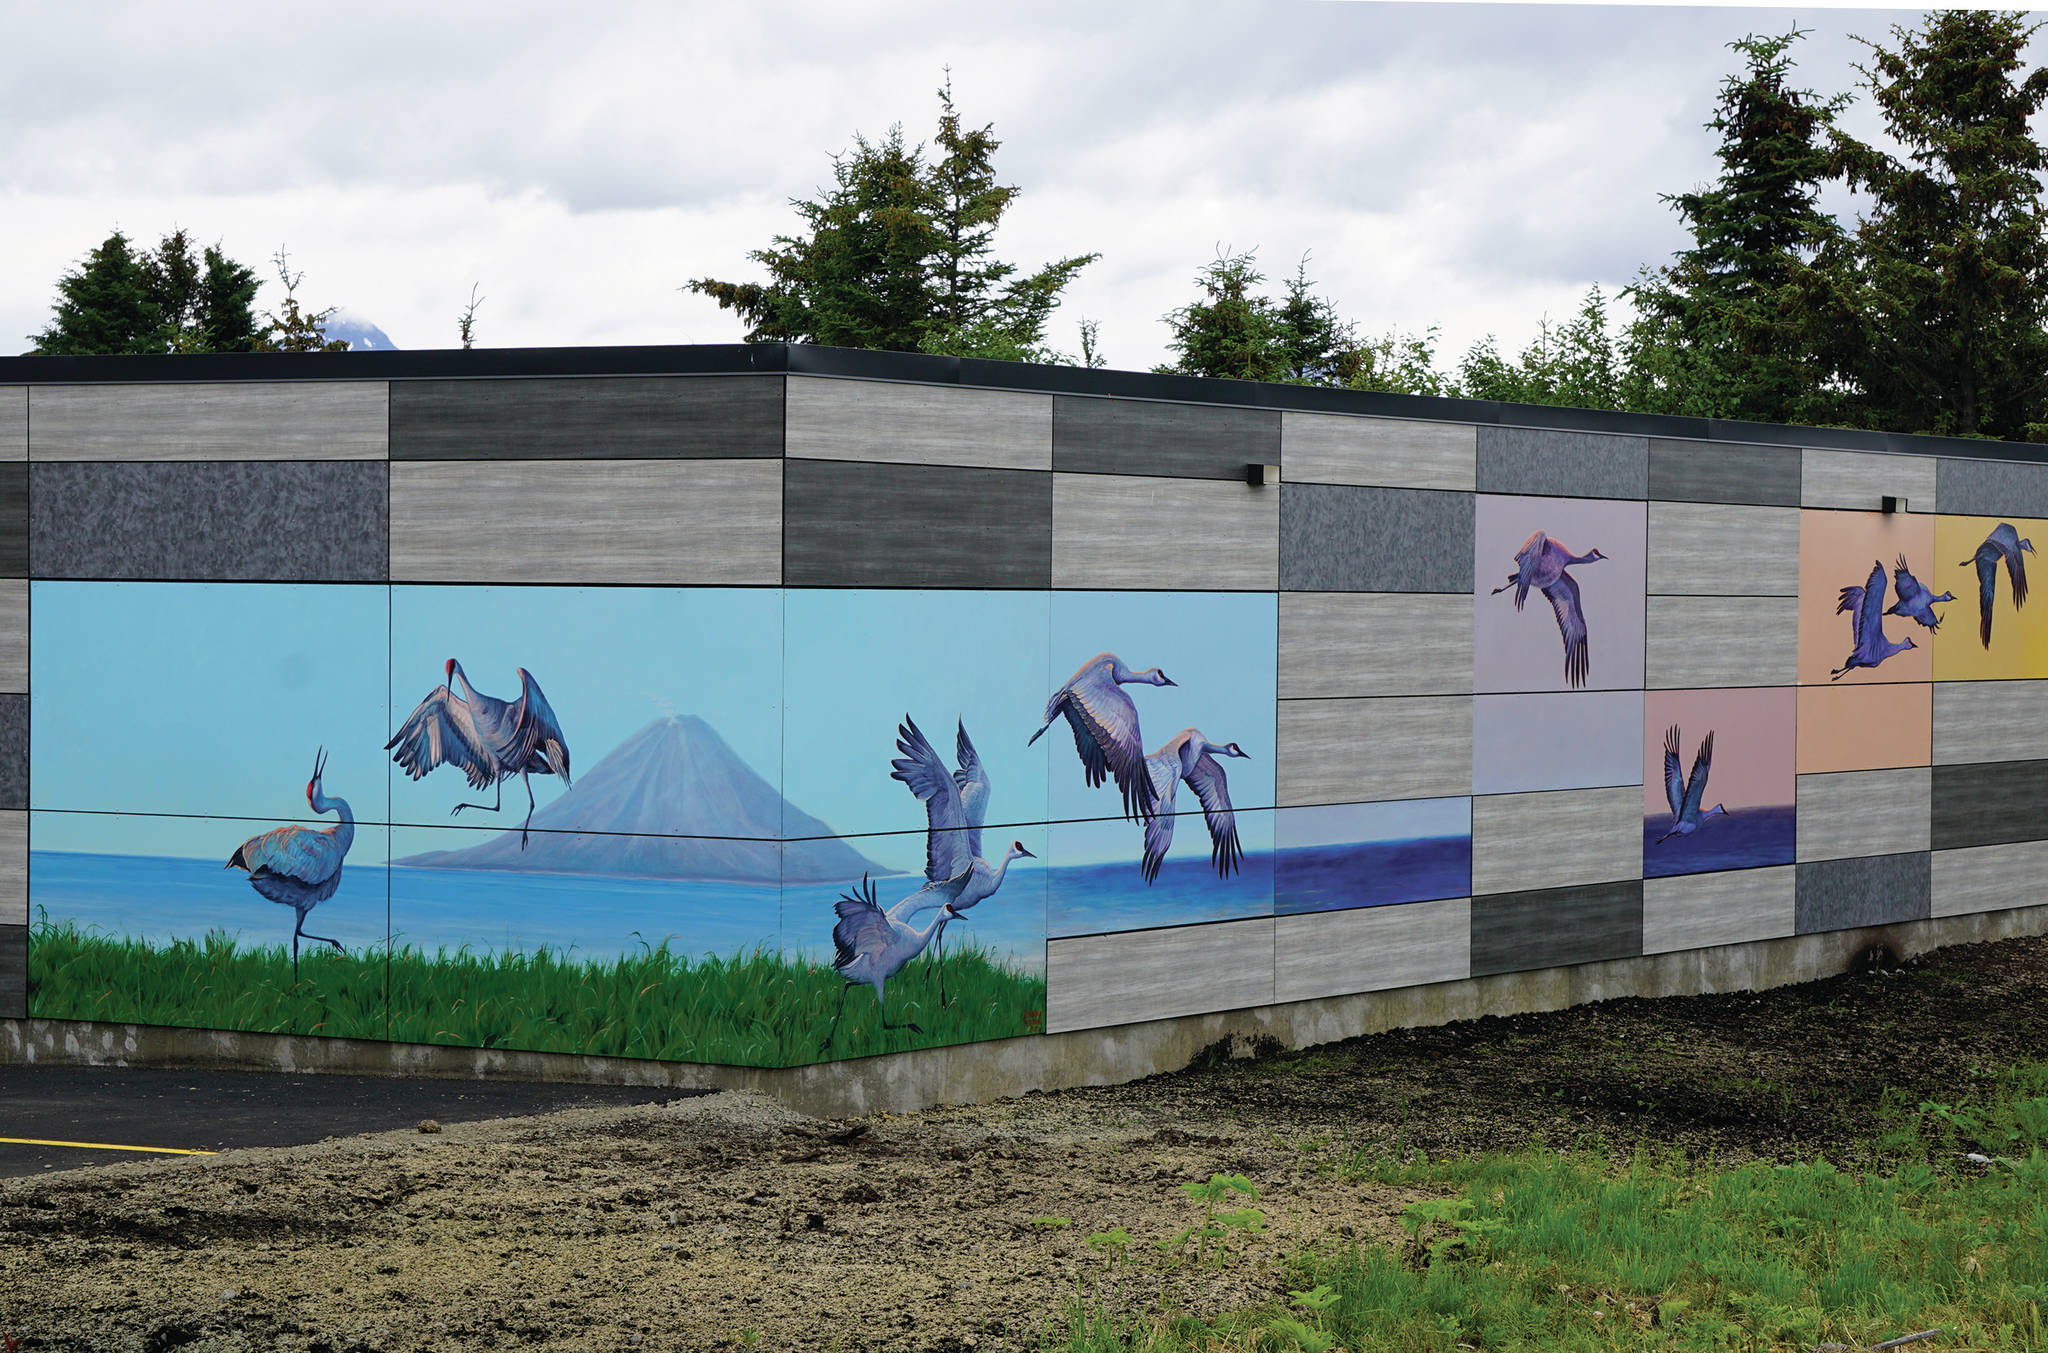 A mural by David Pettibone and Austin Parkhill is part of the 1% for art work on the new Homer Police Station, as seen here on June 25, 2020, in Homer, Alaska. (Photo by Michael Armstrong/Homer News)